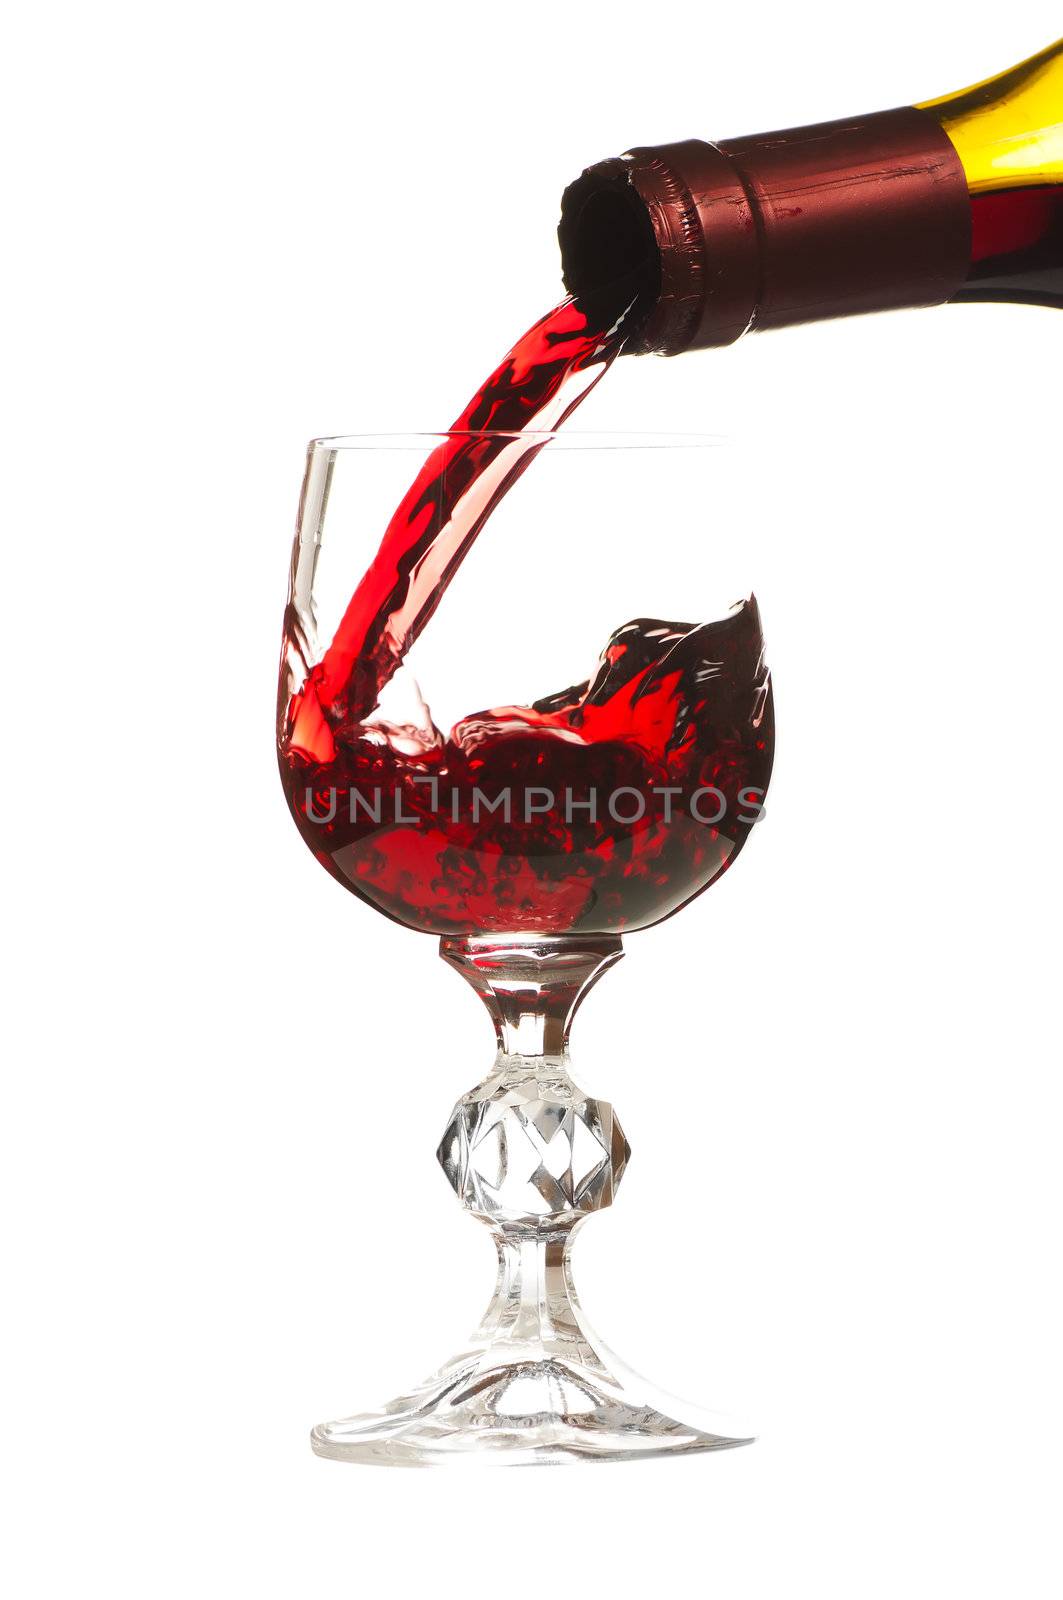 Pouring a glass of wine. Image is isolated over white background